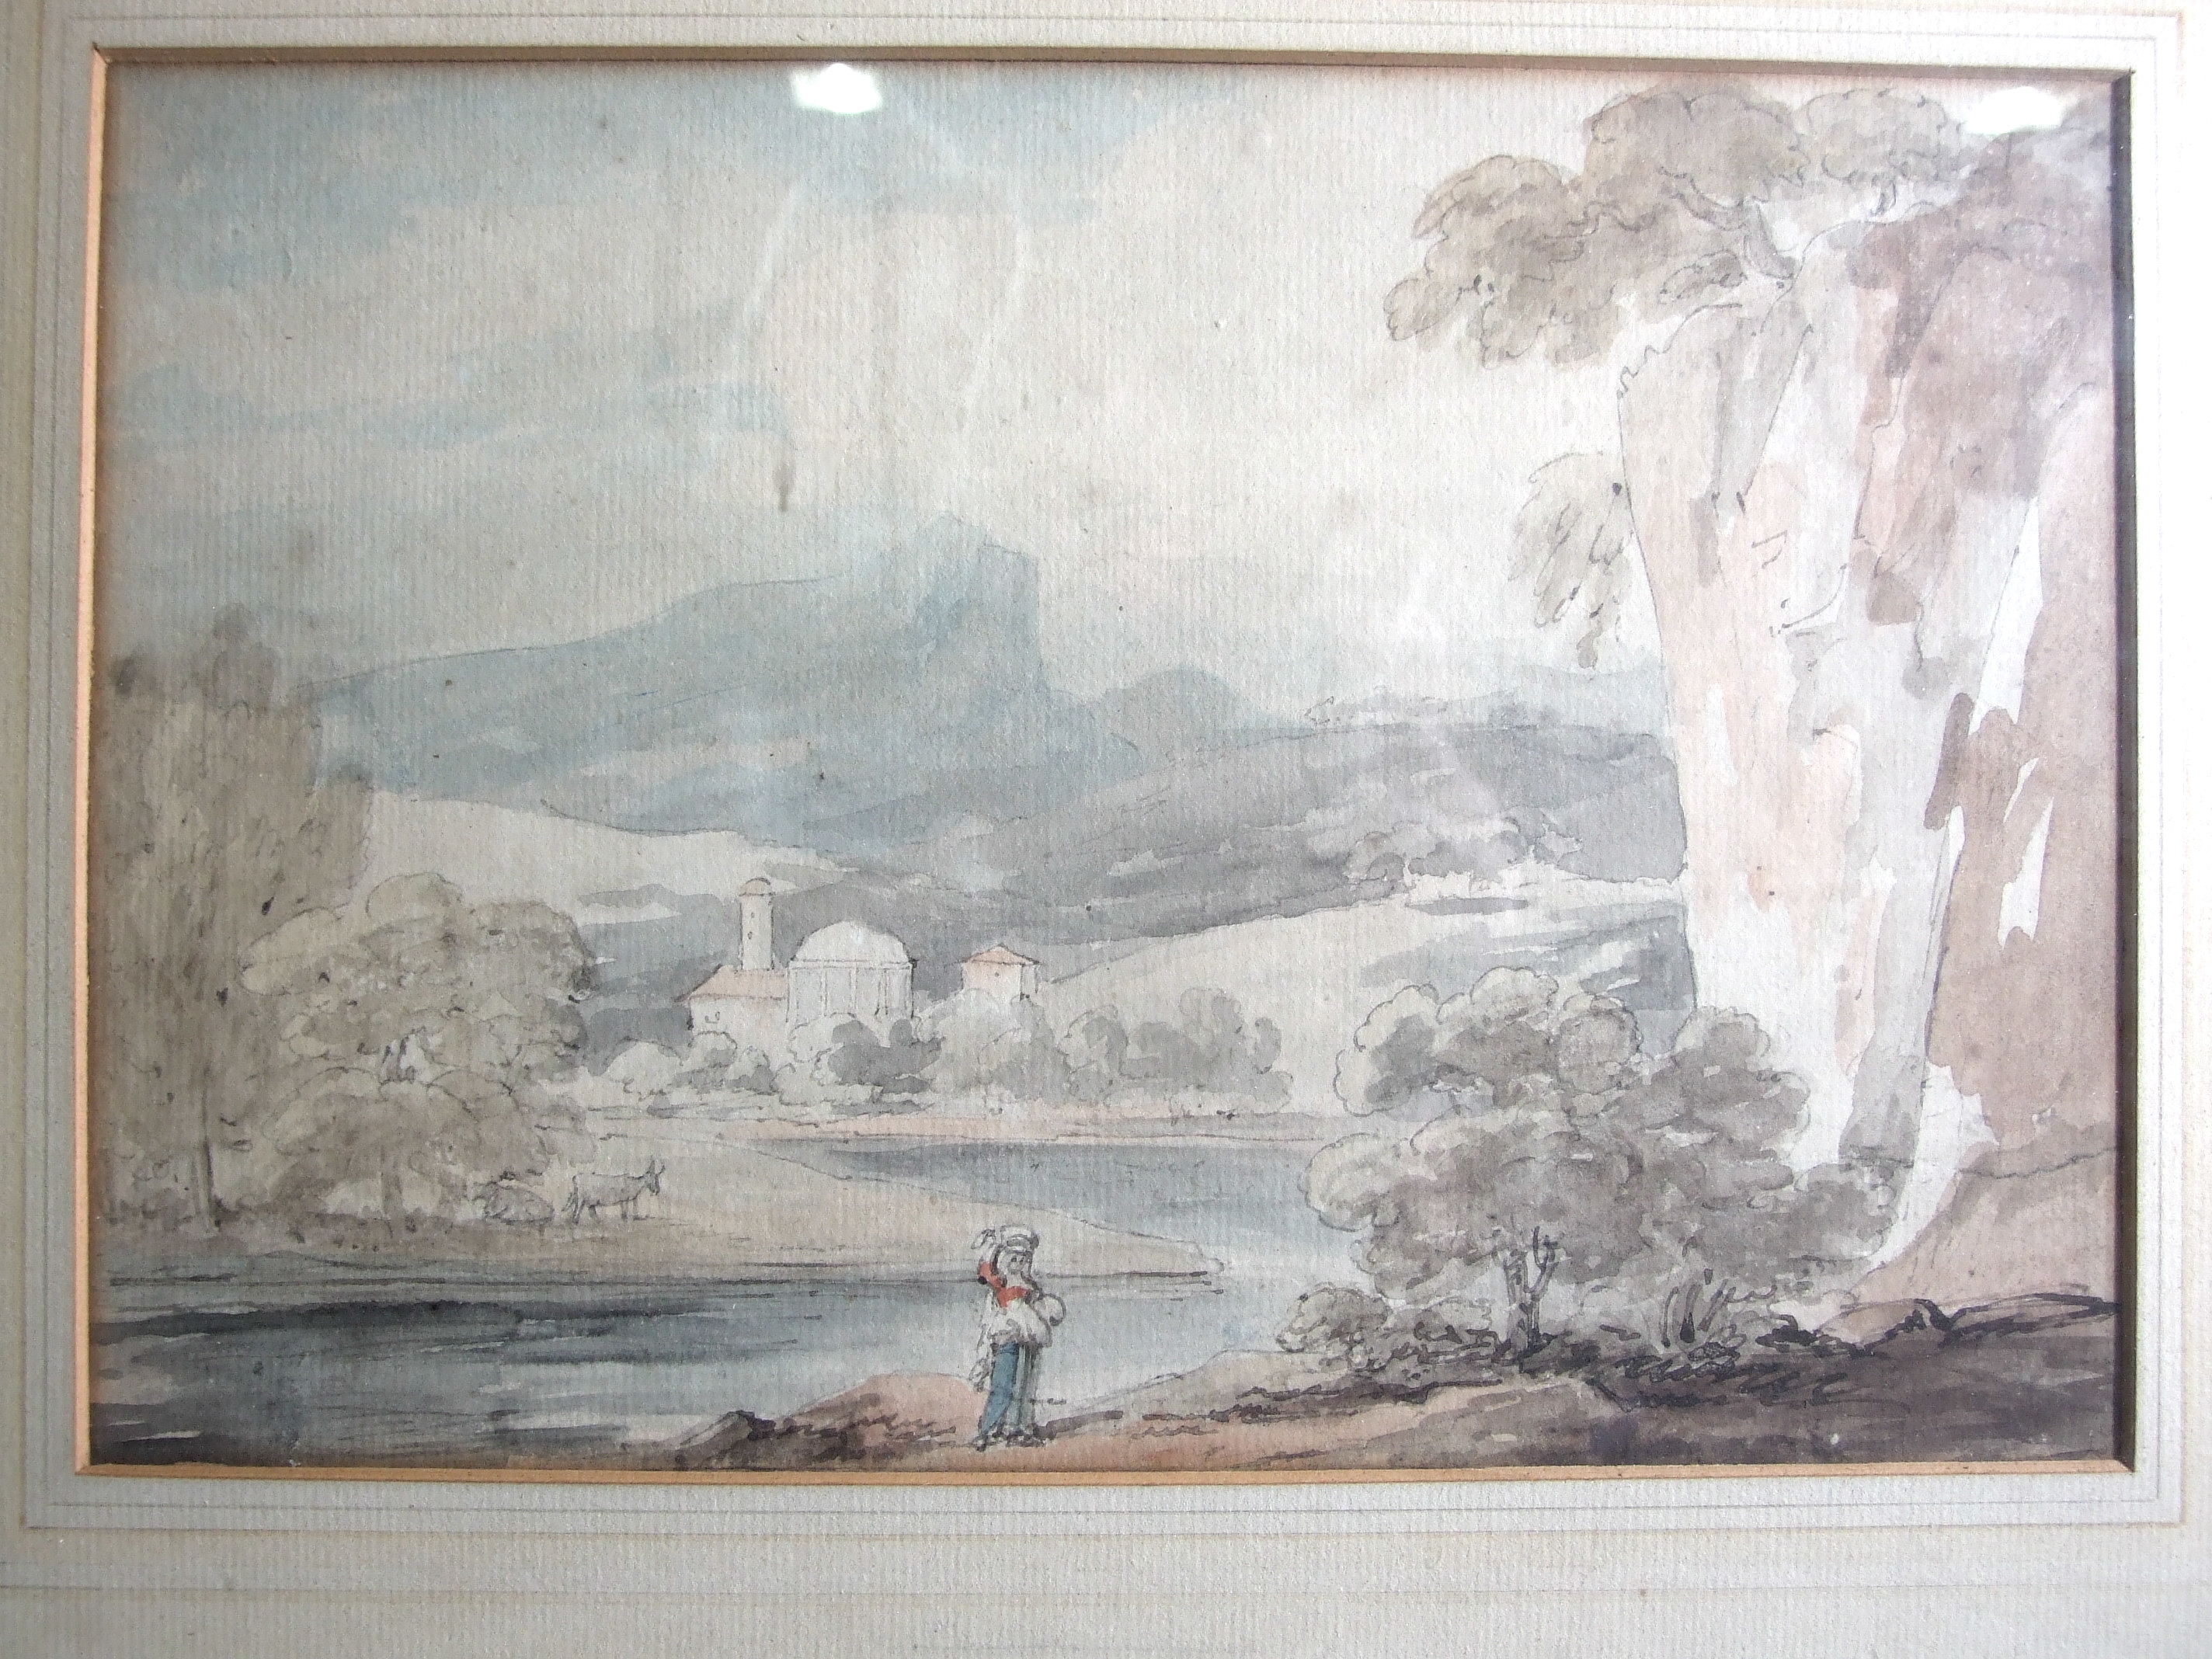 19th century Continental School ITALIAN TOWN WITH LAKES AND MOUNTAINS BEHIND Watercolour, 21.5 x